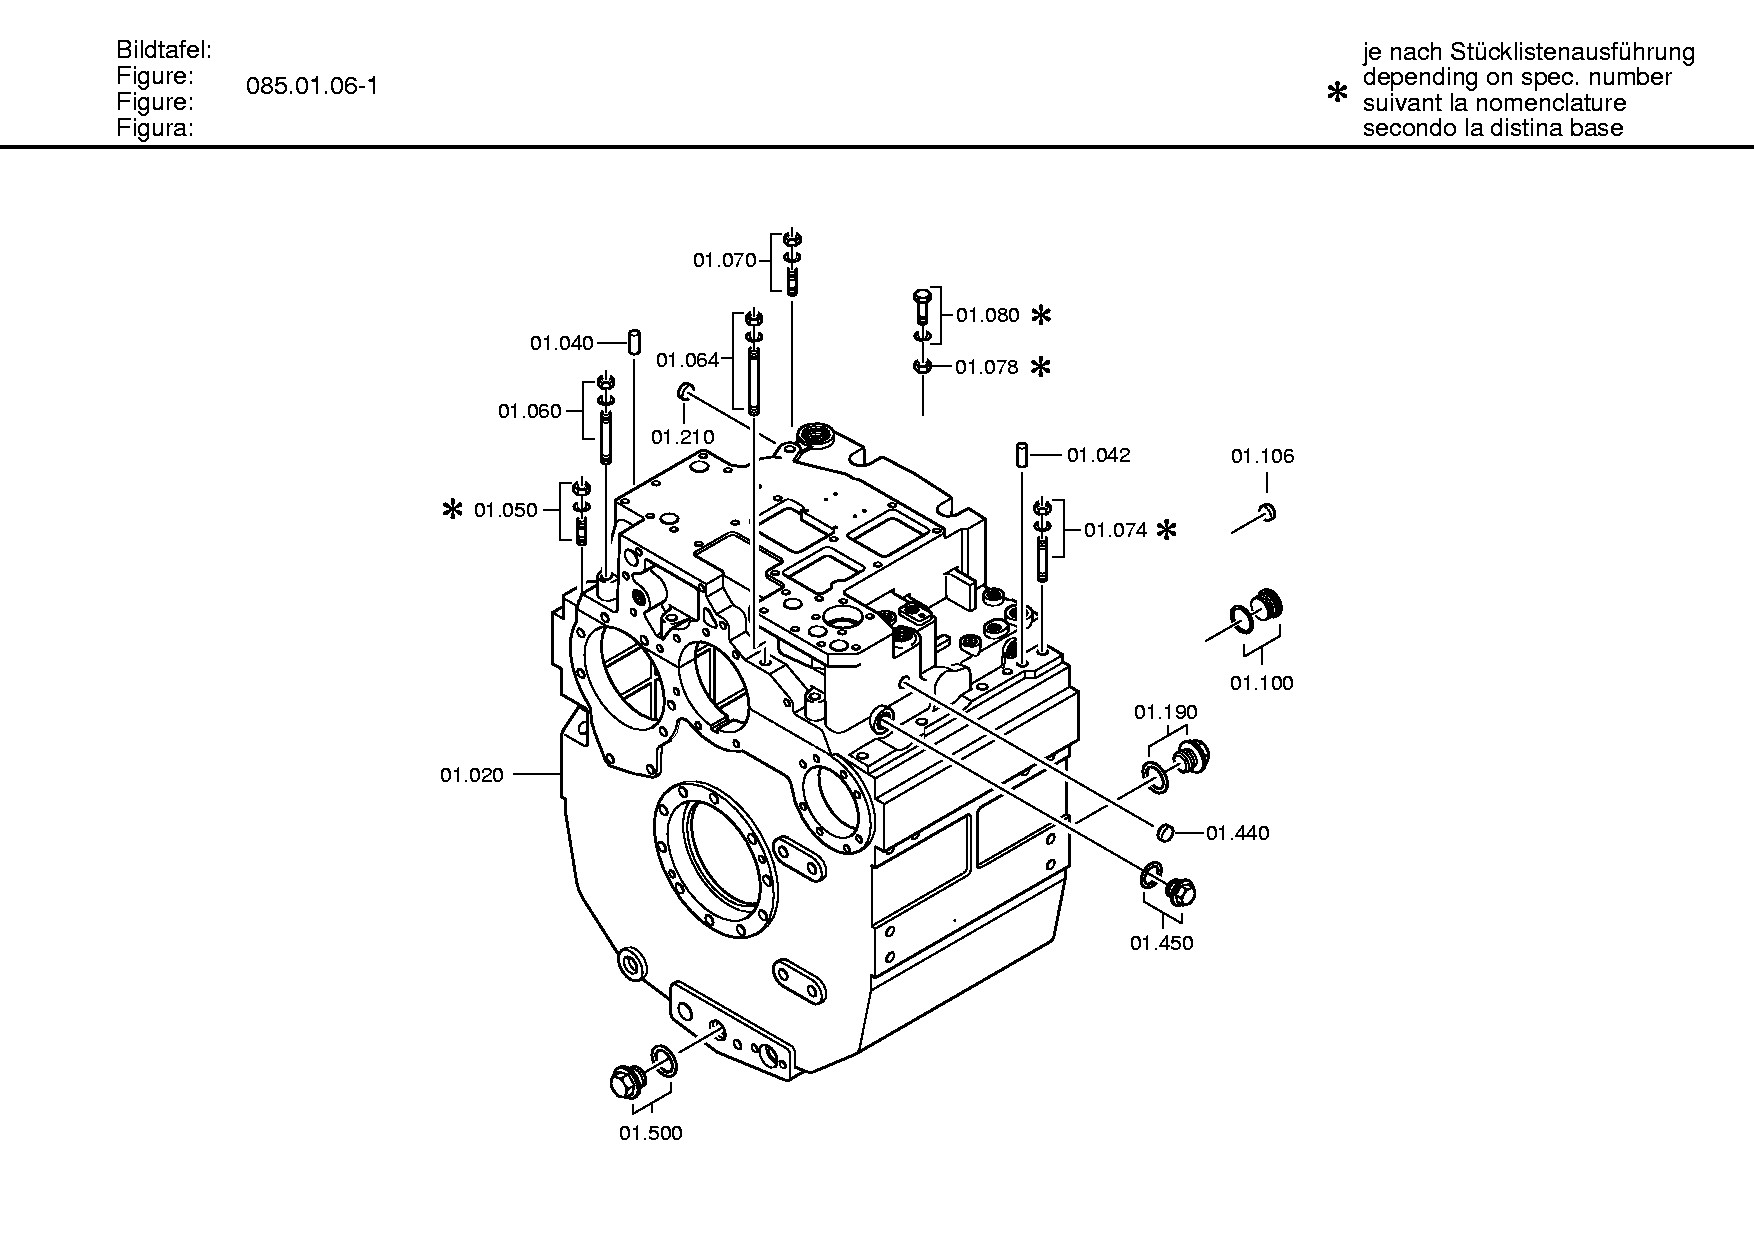 drawing for NISSAN MOTOR CO. 07902922-0 - CYLINDRICAL PIN (figure 1)